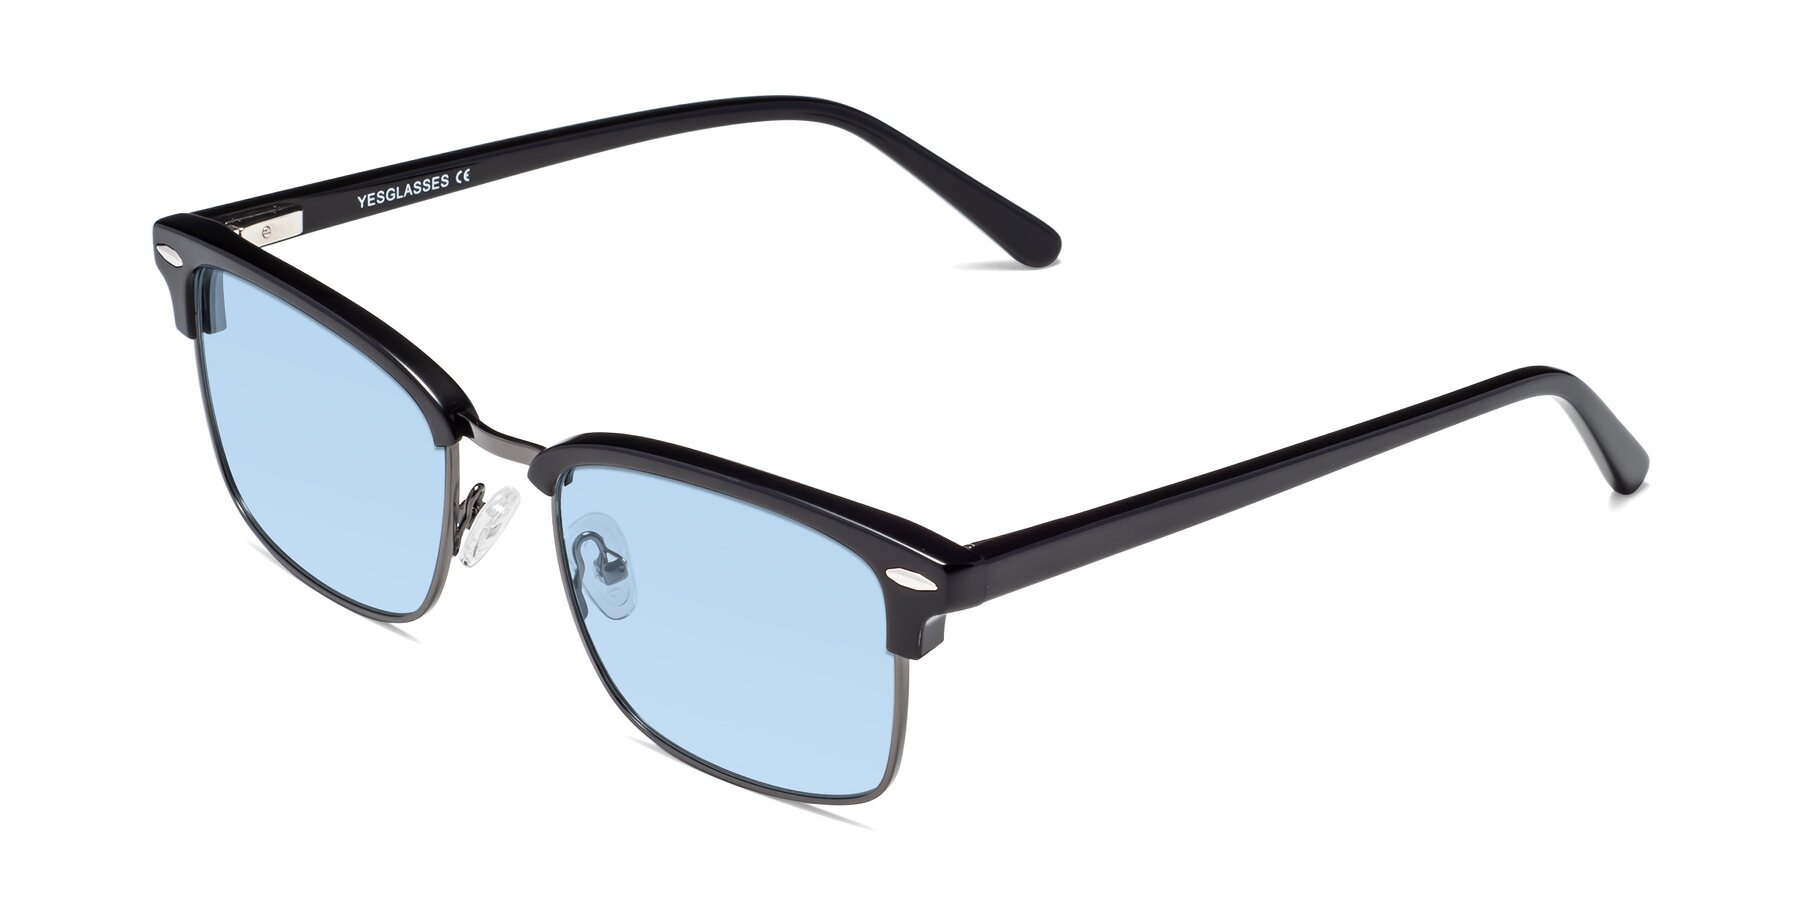 Angle of 17464 in Black-Gunmetal with Light Blue Tinted Lenses